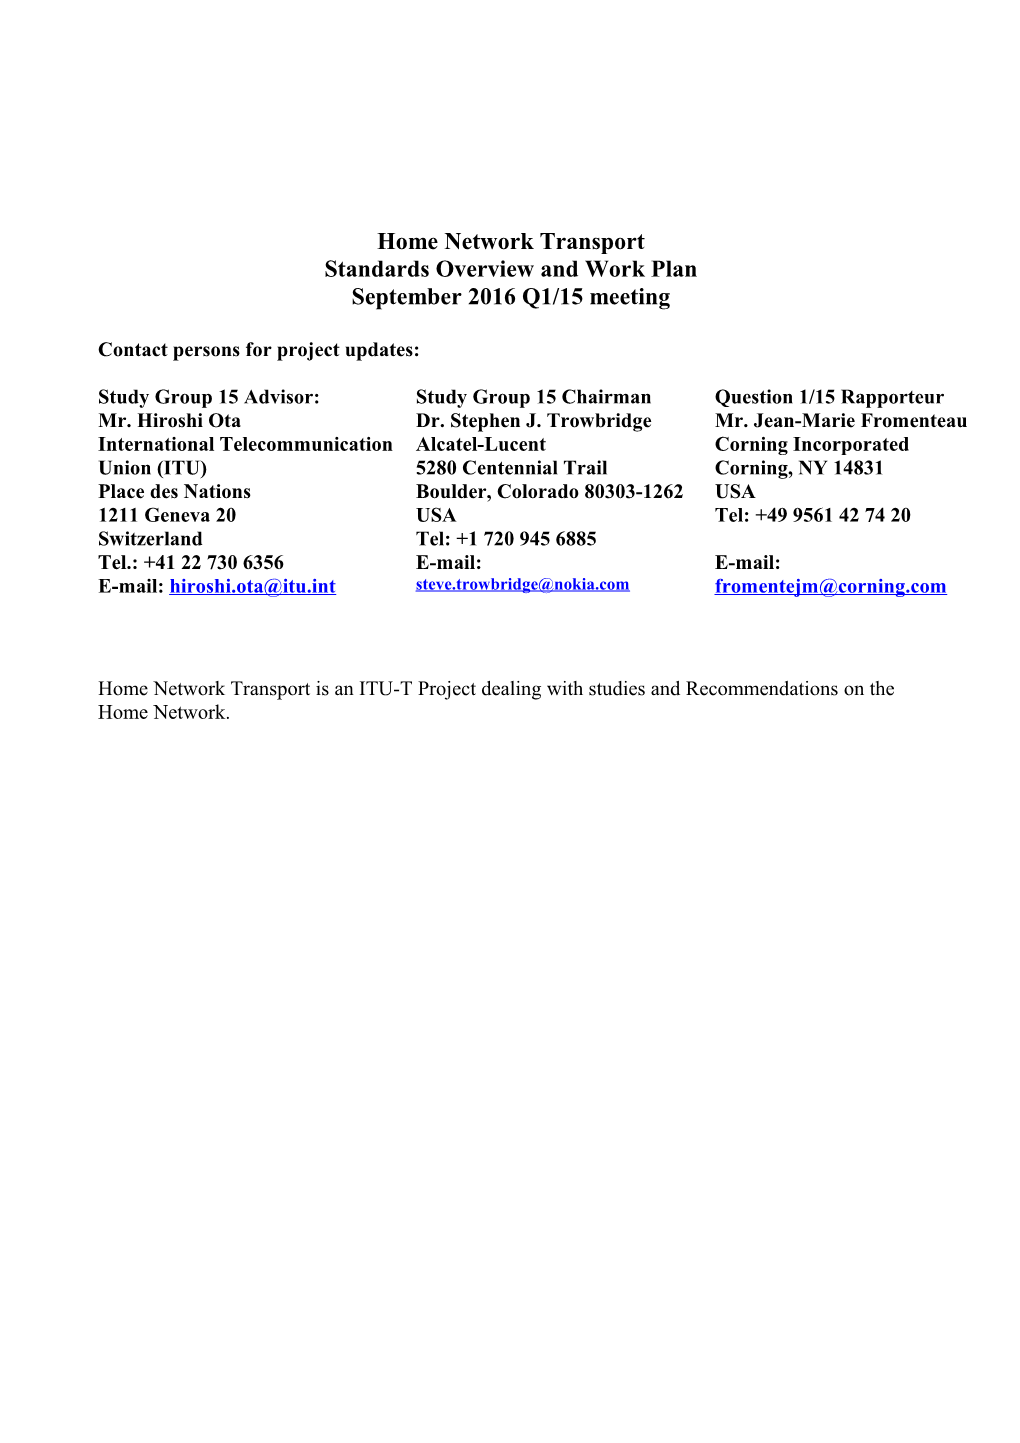 Version 2 of the HNT Standards Overview and Work Plan